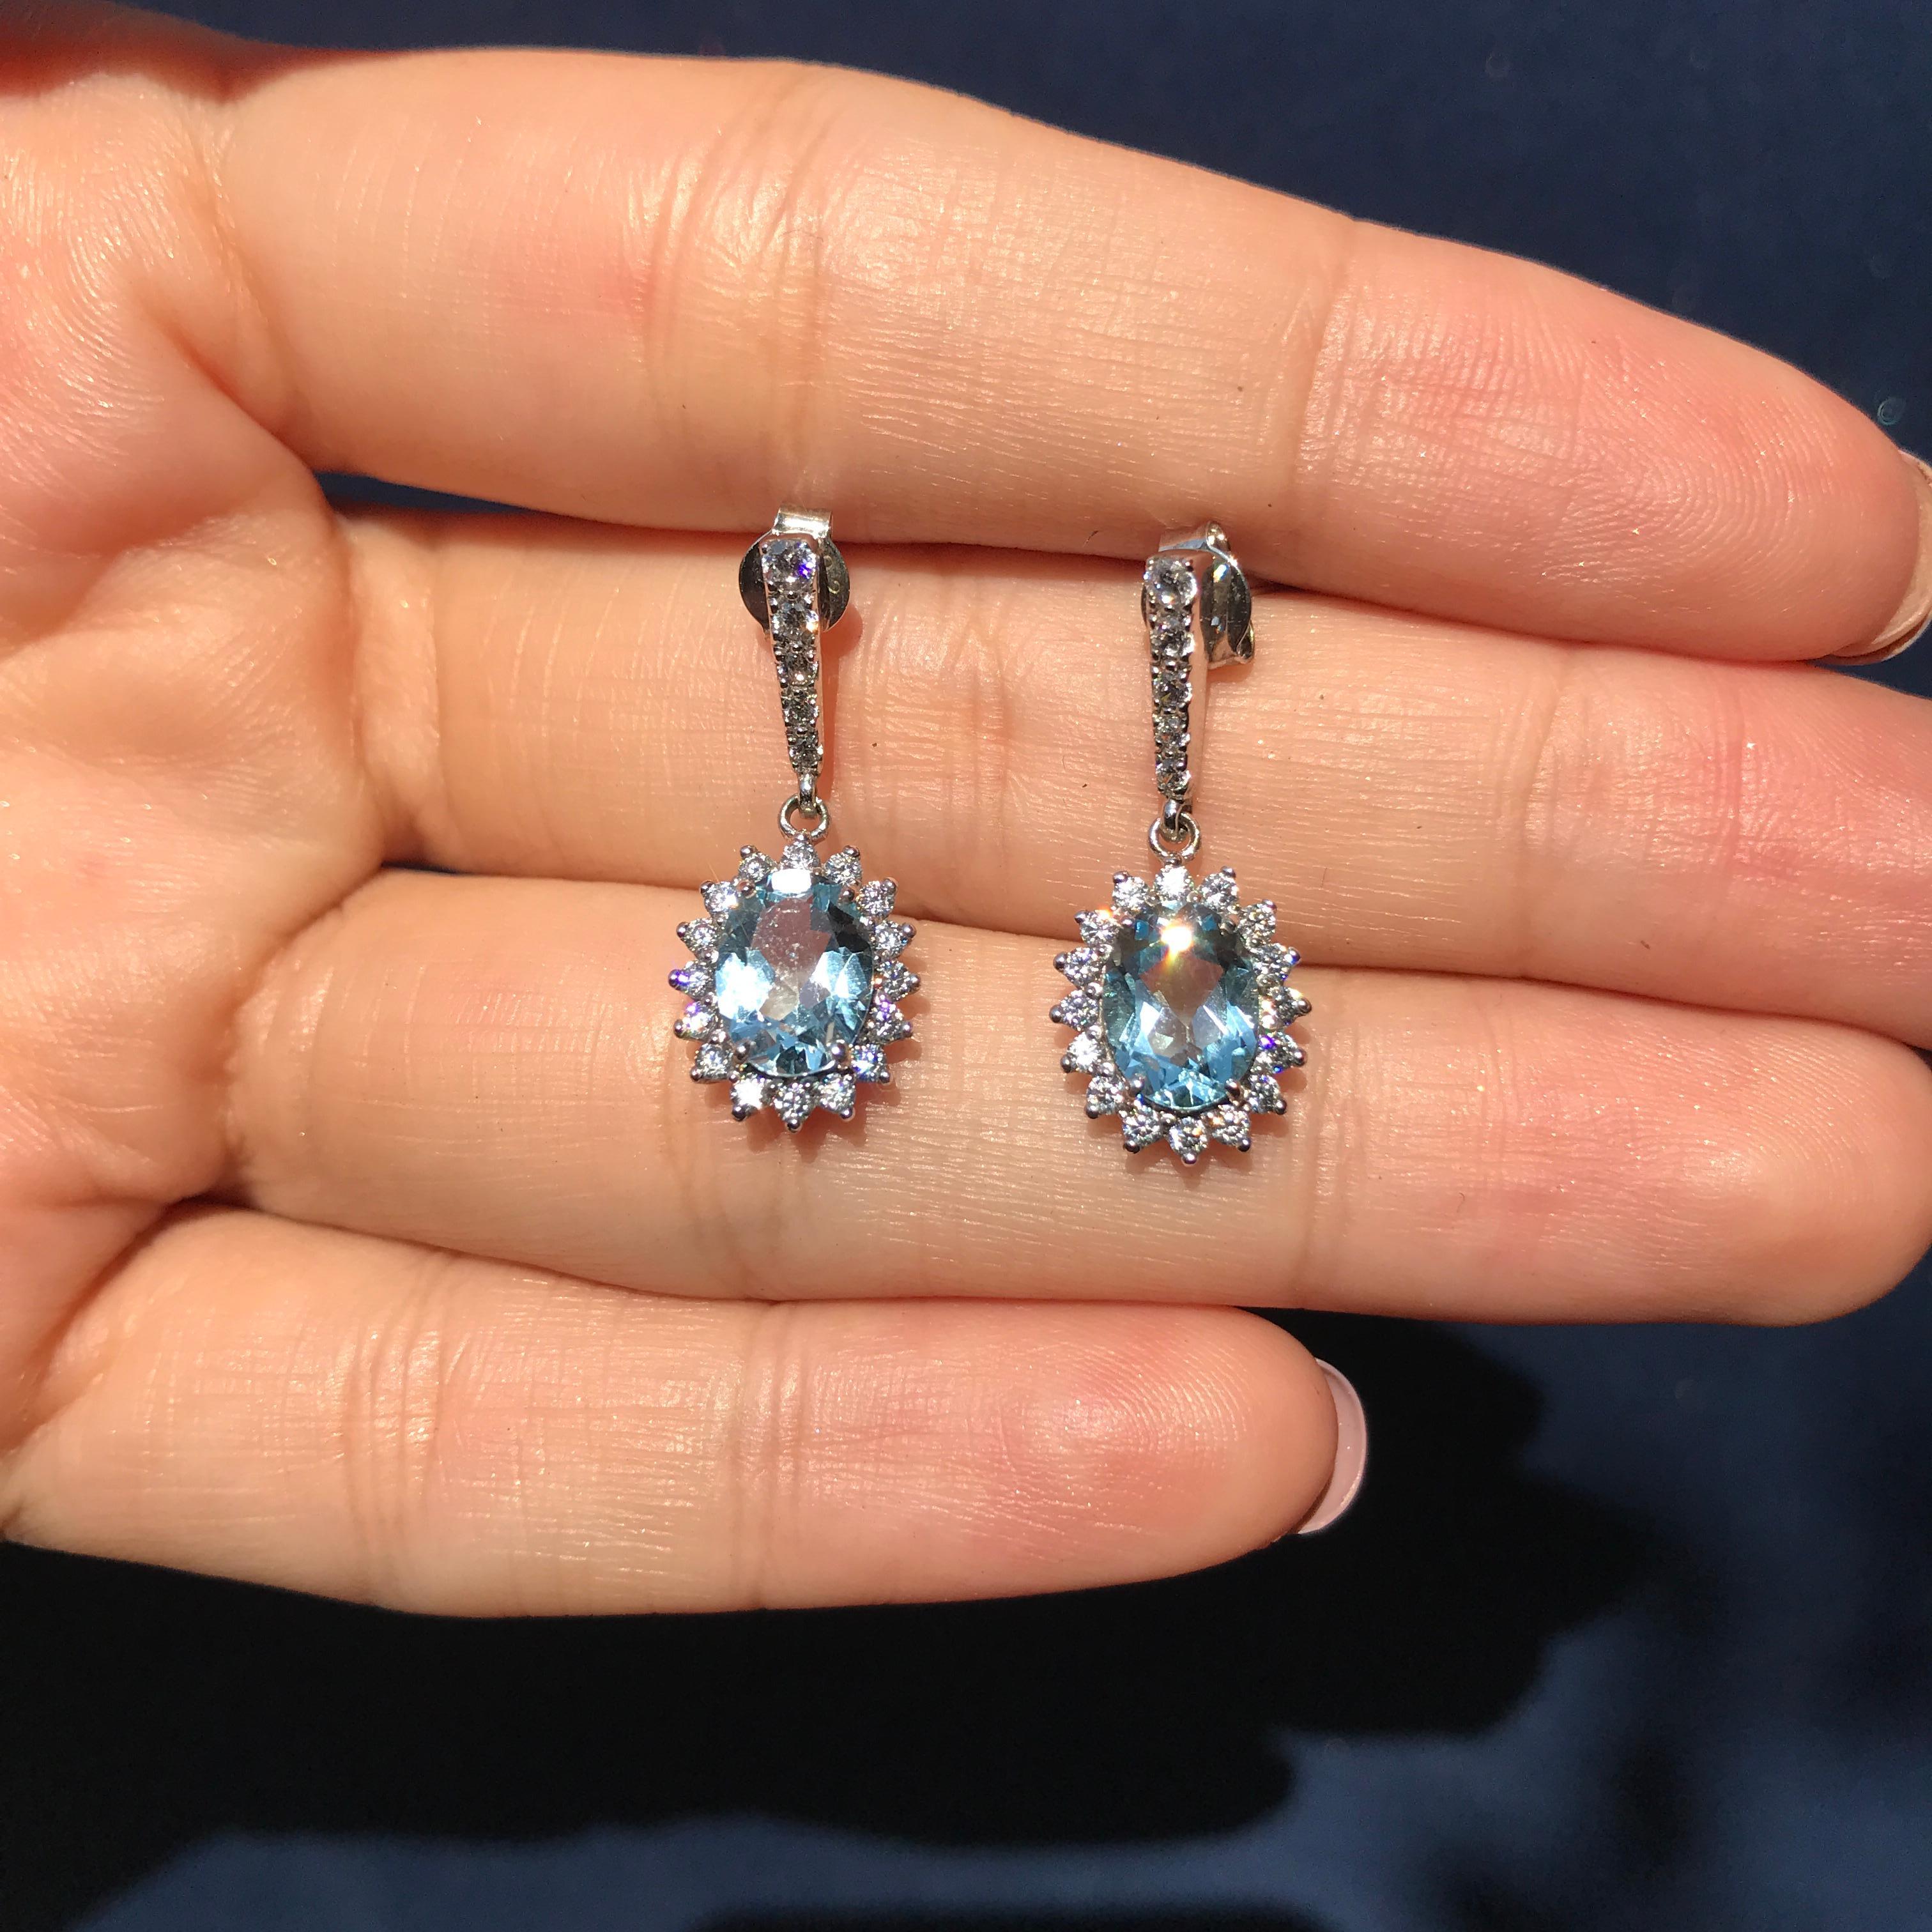 These blue topaz halo earrings are a luxurious beauty in 14K white gold. A halo of diamonds highlights the gemstone’s summery blue hue. Sparkling diamonds adorn the bale of extra brilliance. A perfect gift for your beloved one.

Information
Metal: